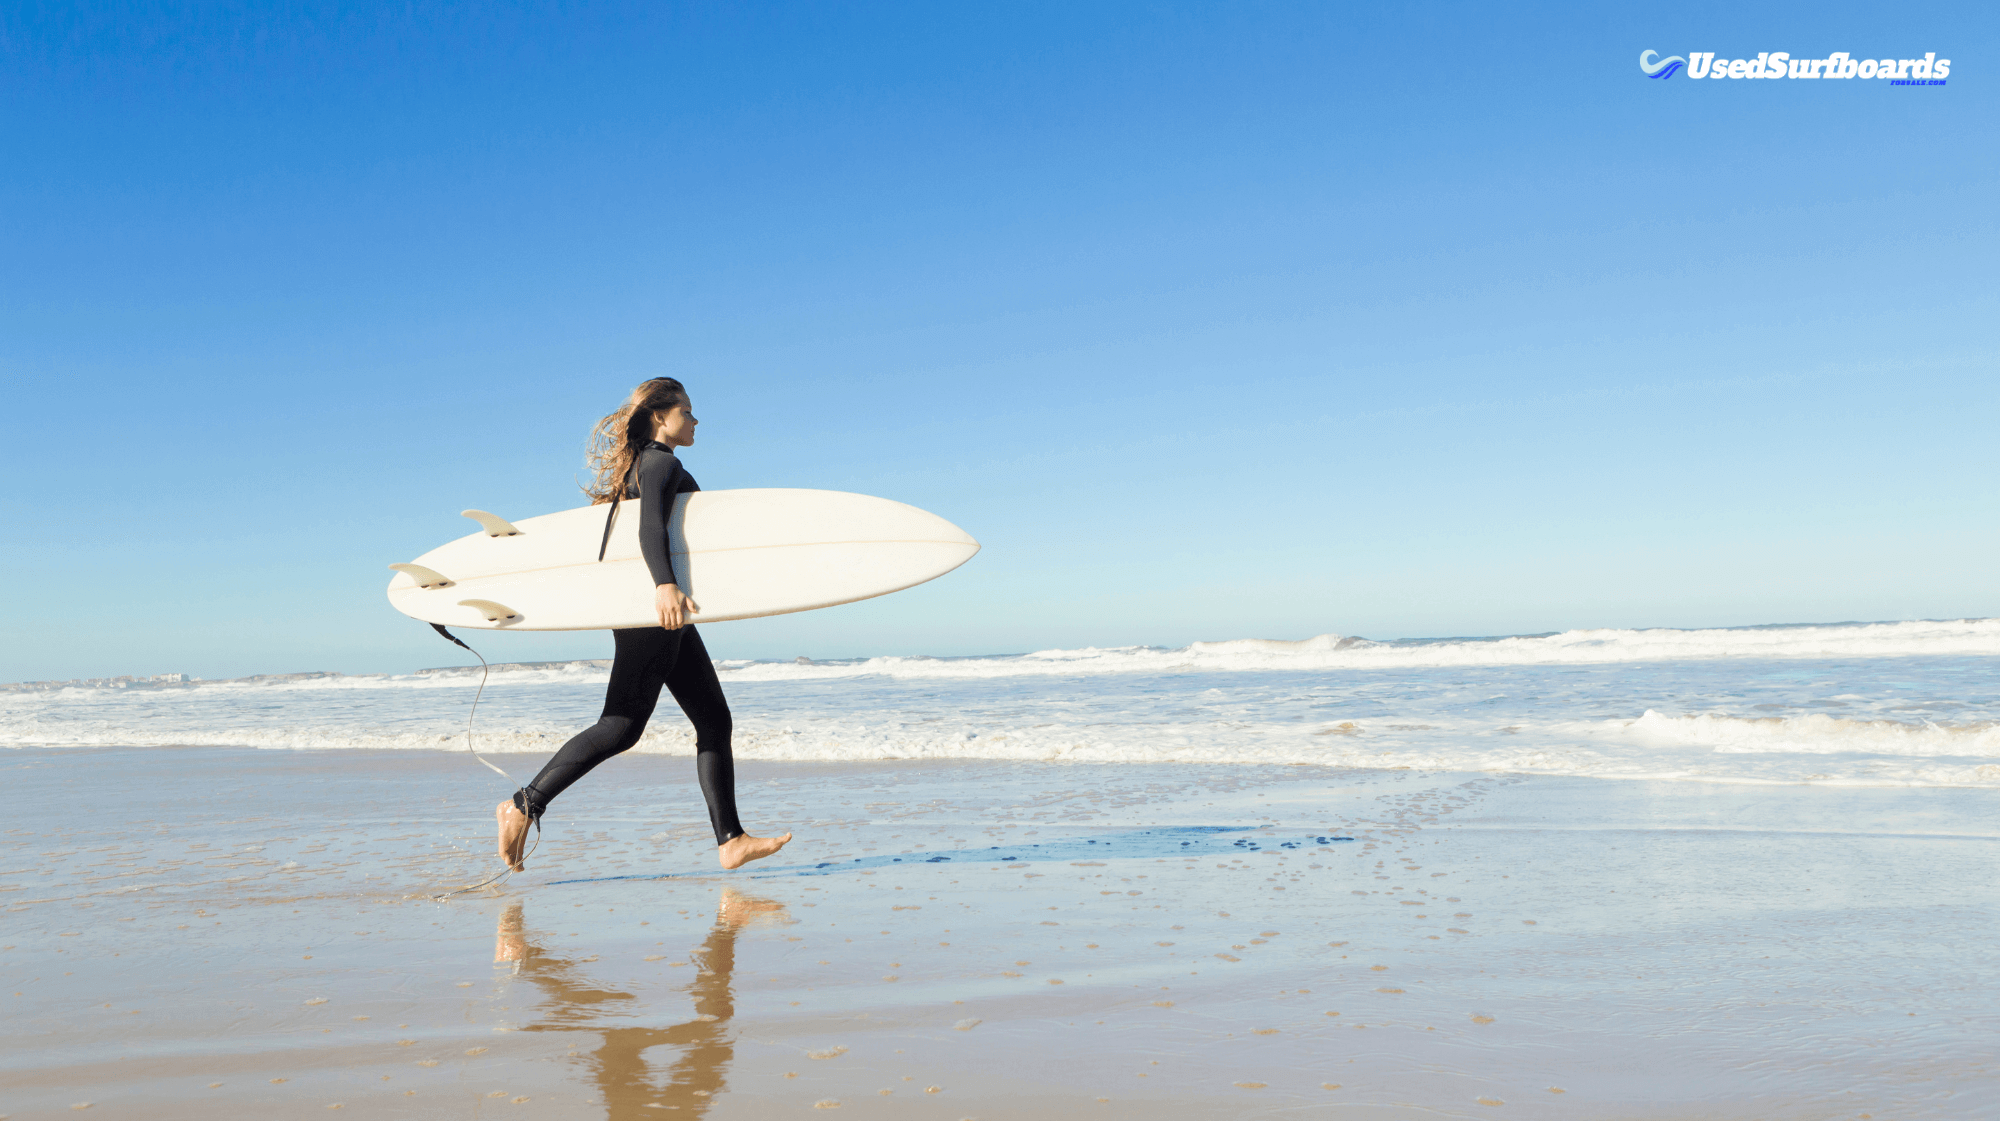 Vintage Surfboard: Discover the History of Surf Gear